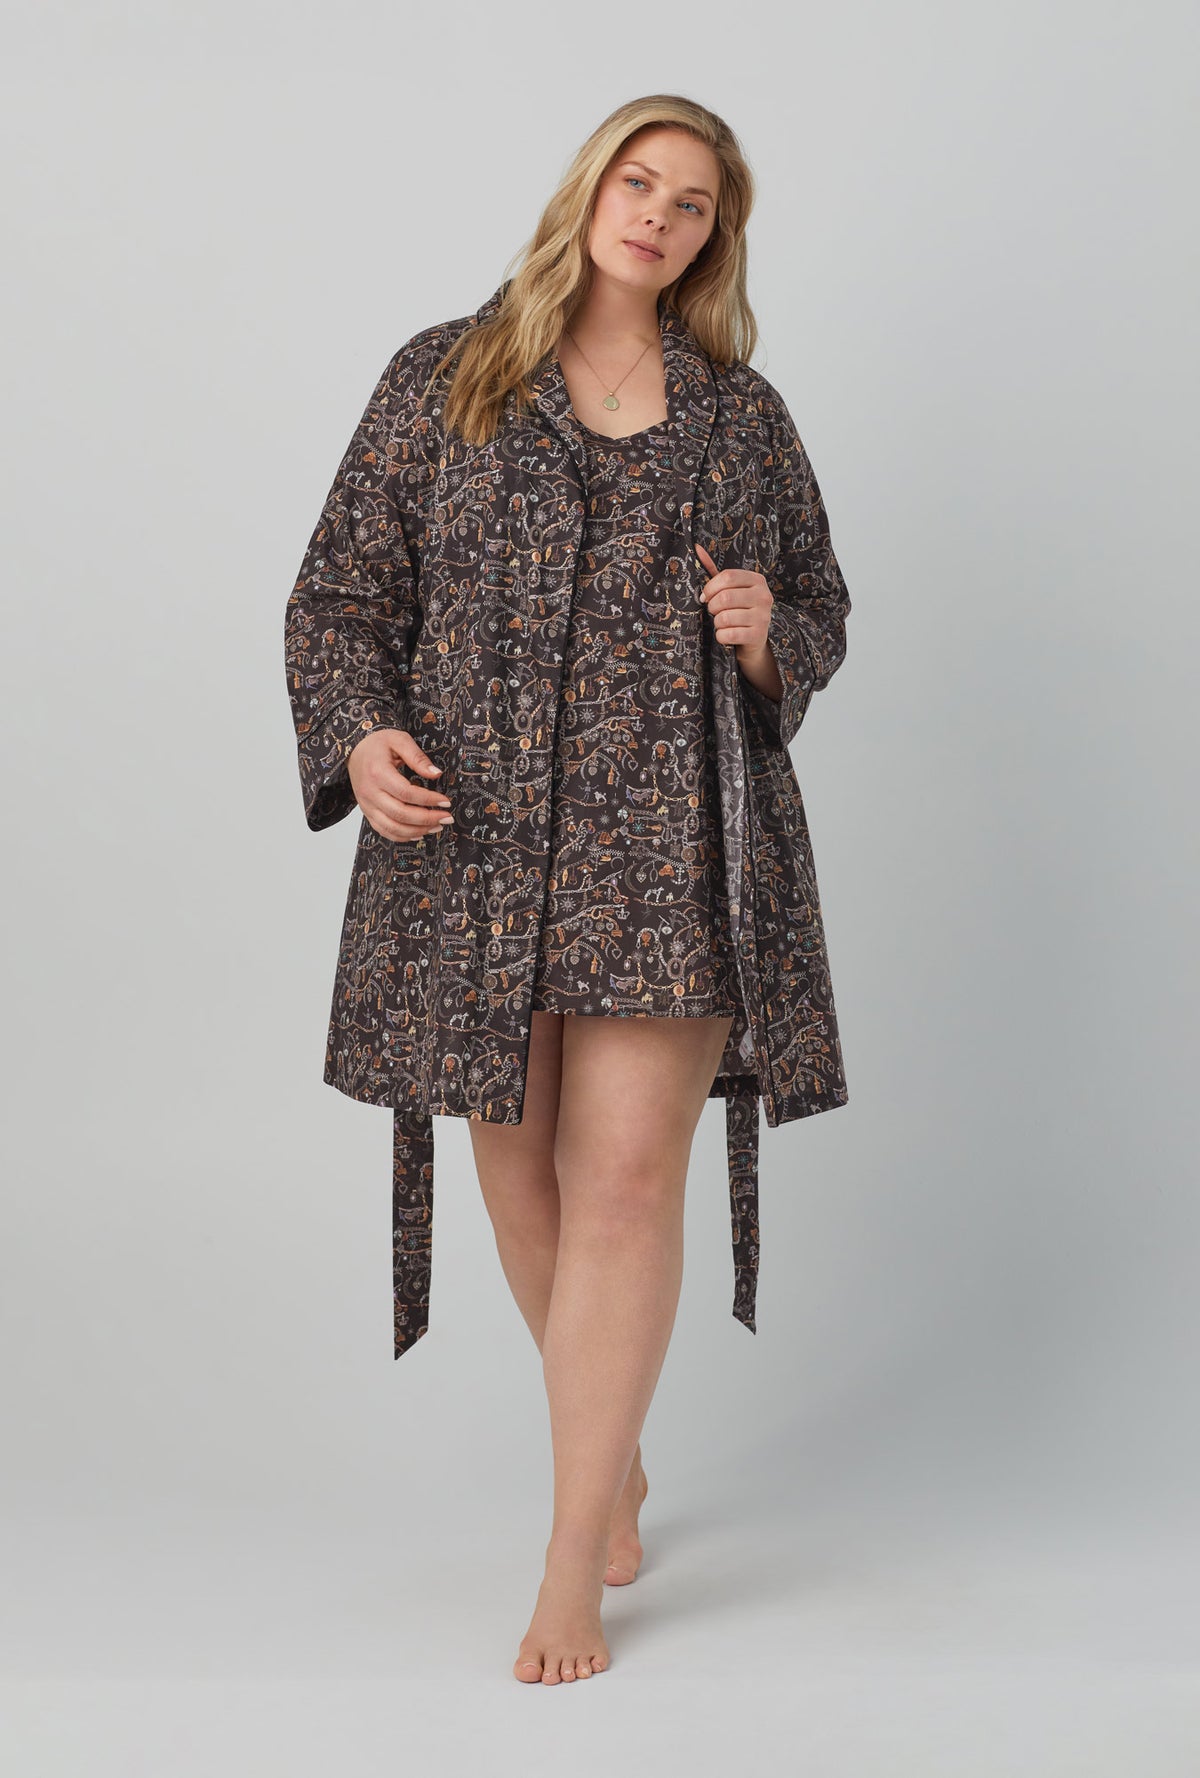 A lady wearing Shawl Collar Classic Woven Tana Lawn® Robe Made with Liberty Fabrics with Forever Heirloom print